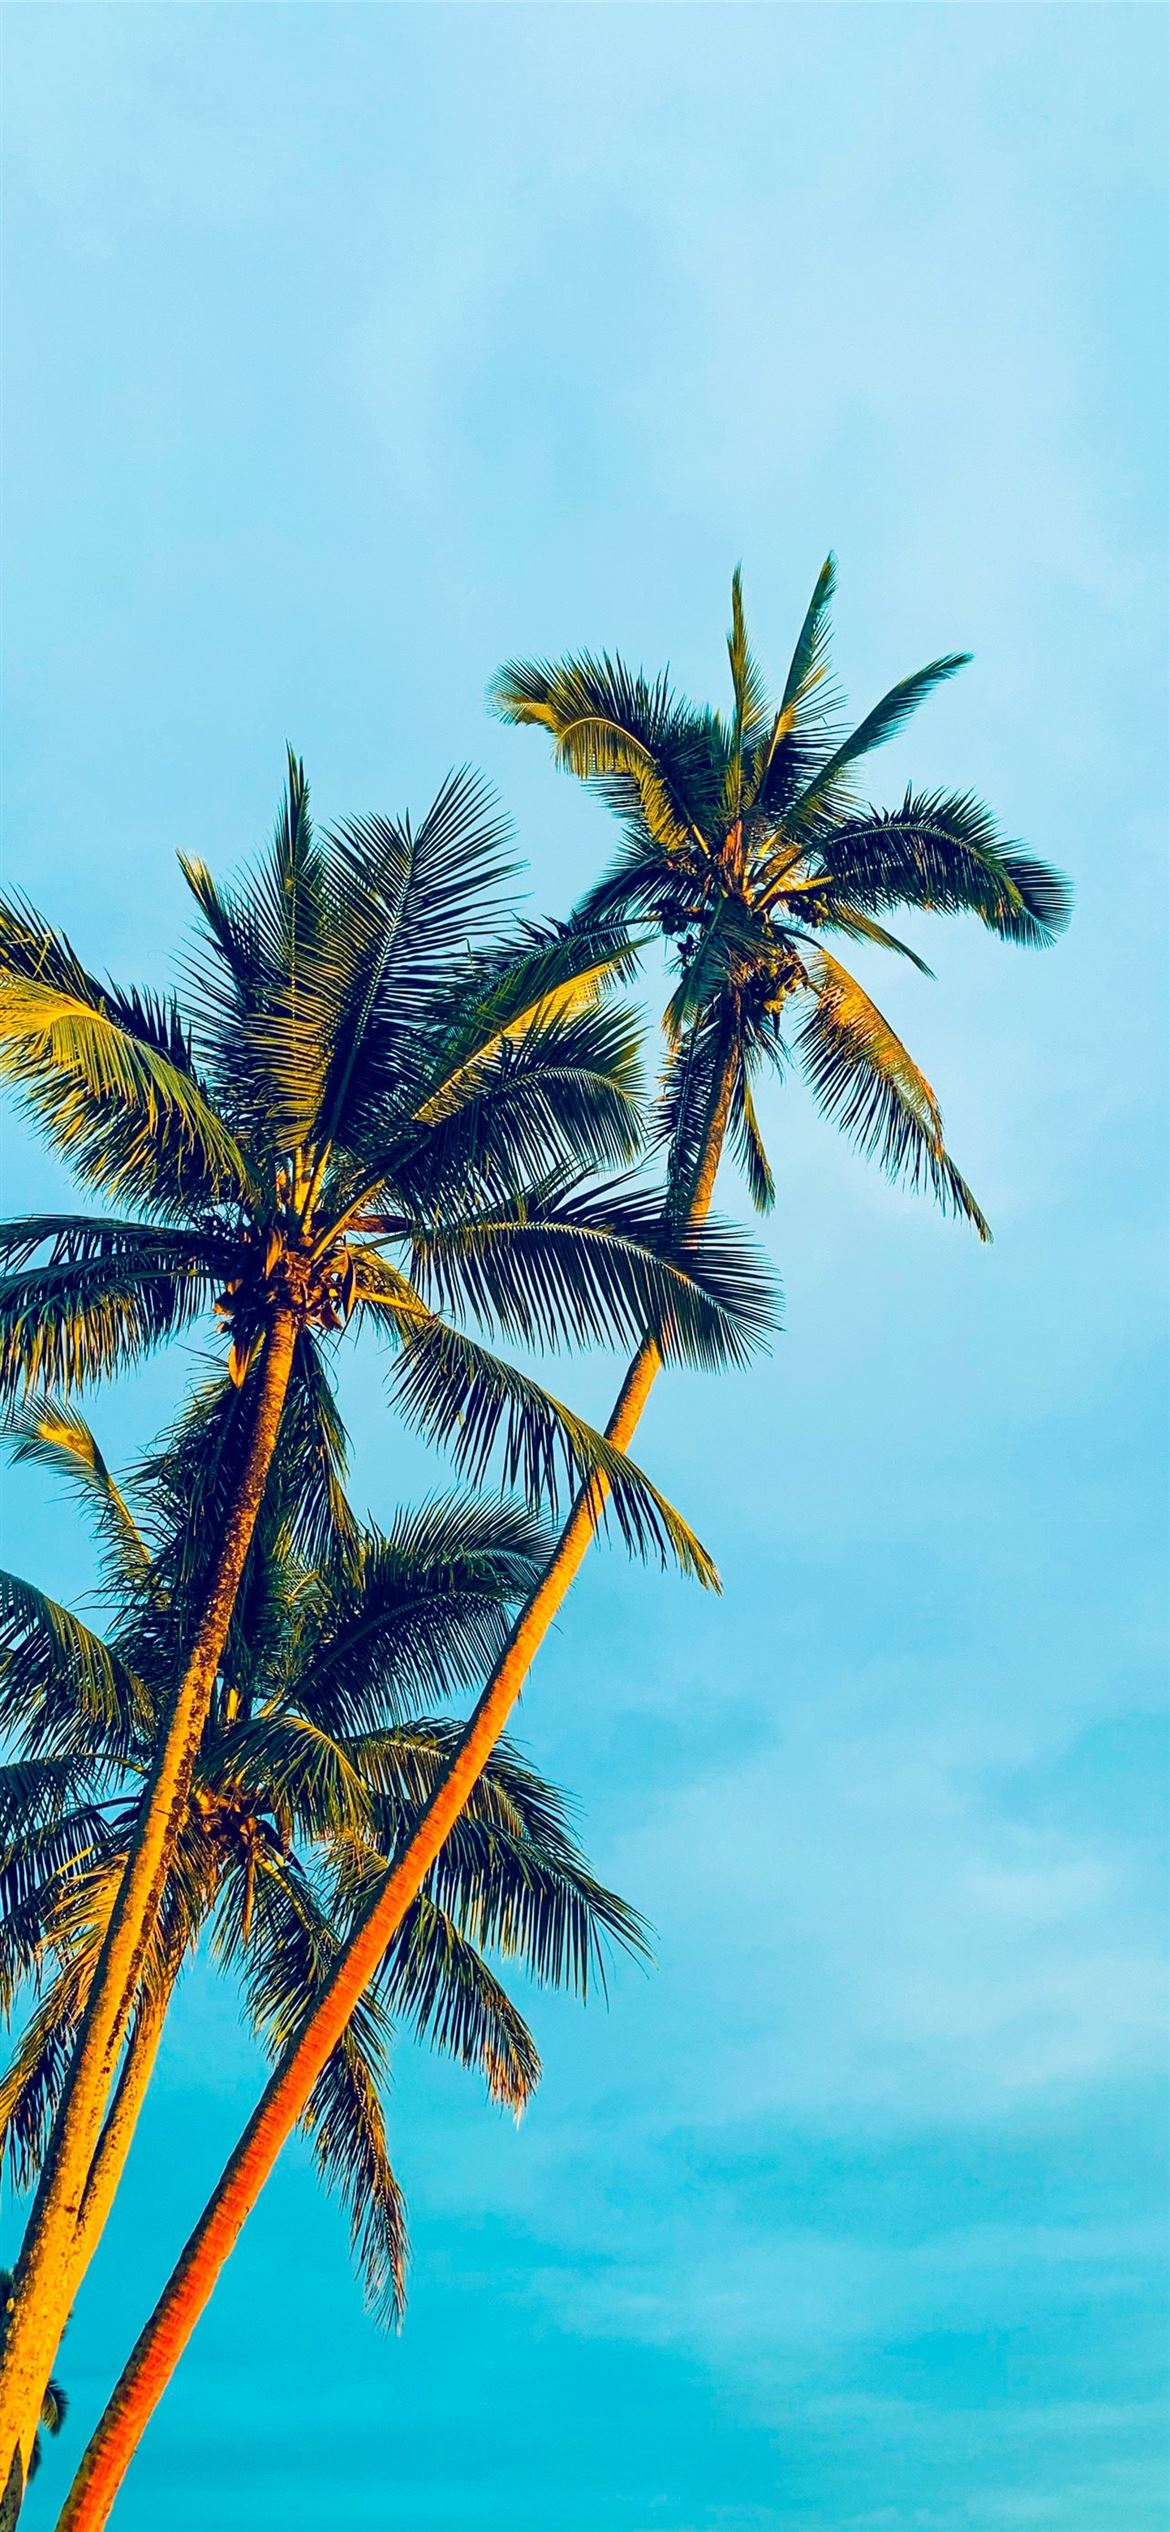 Coconut Trees Under Blue Sky During Daytime iPhone Wallpaper